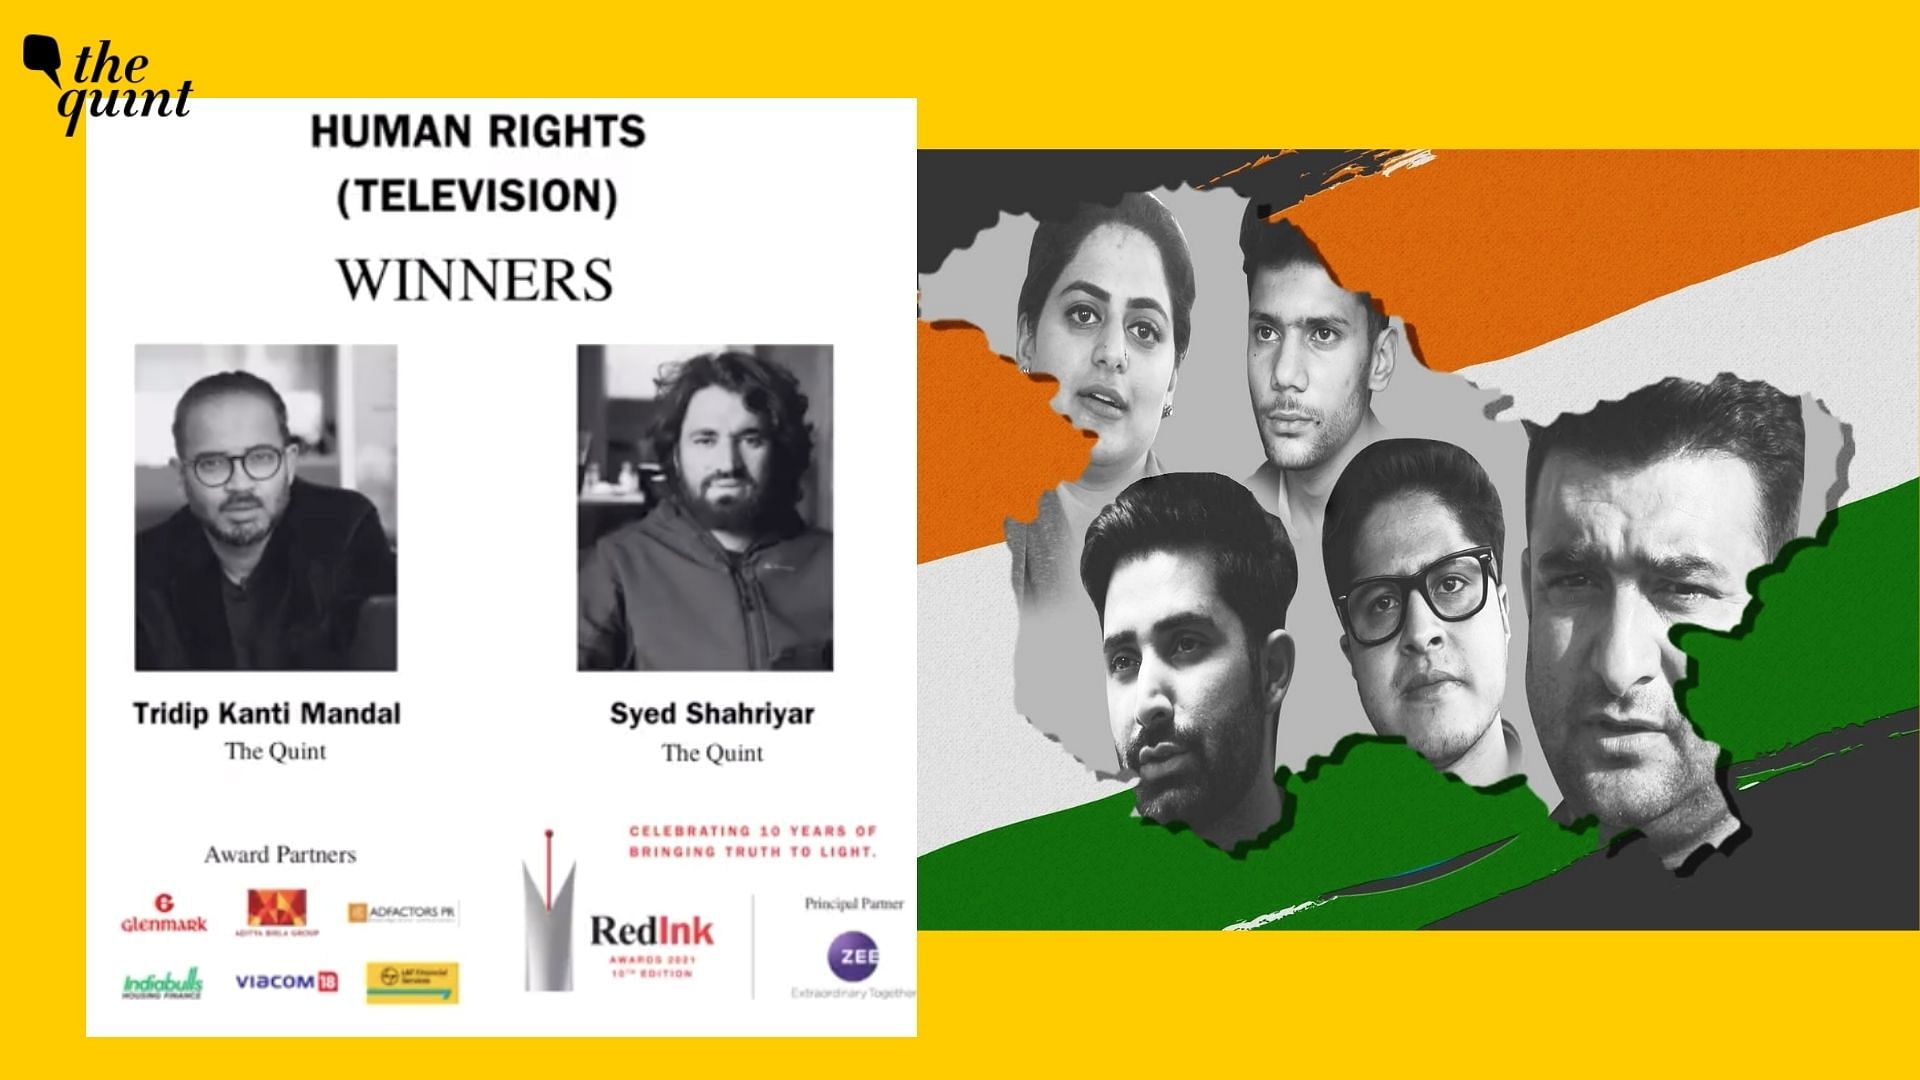 <div class="paragraphs"><p>The Mumbai Press Club on Wednesday, 29 December, announced <strong>The Quint’s</strong> Creative Director Tridip K Mandal, as well as independent journalist Syed Shahriyar, as winners of the prestigious RedInk Award in the Human Rights (TV) category.</p></div>